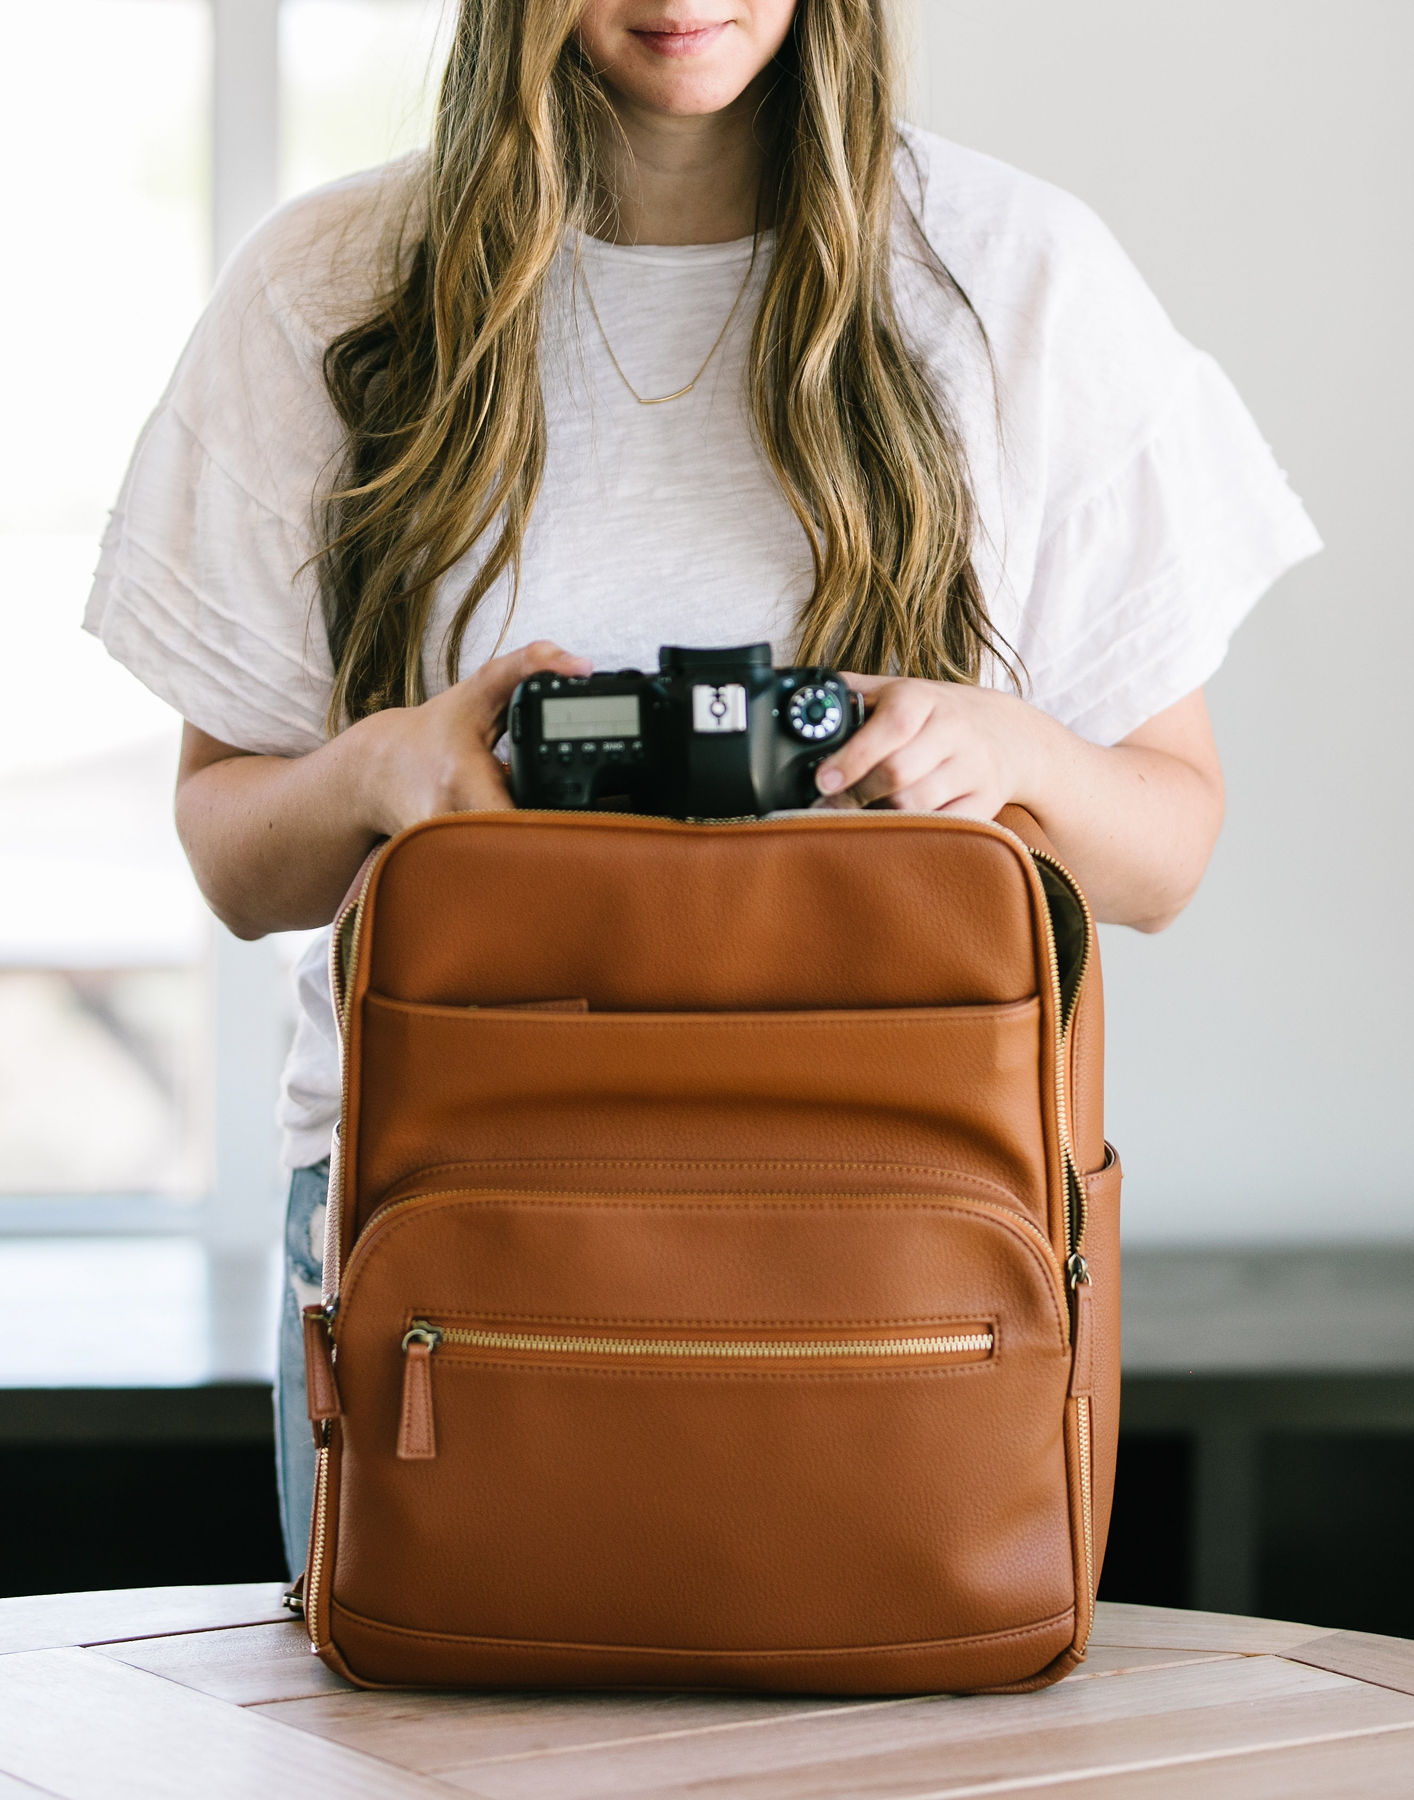 woman putting a camera in a leather bag